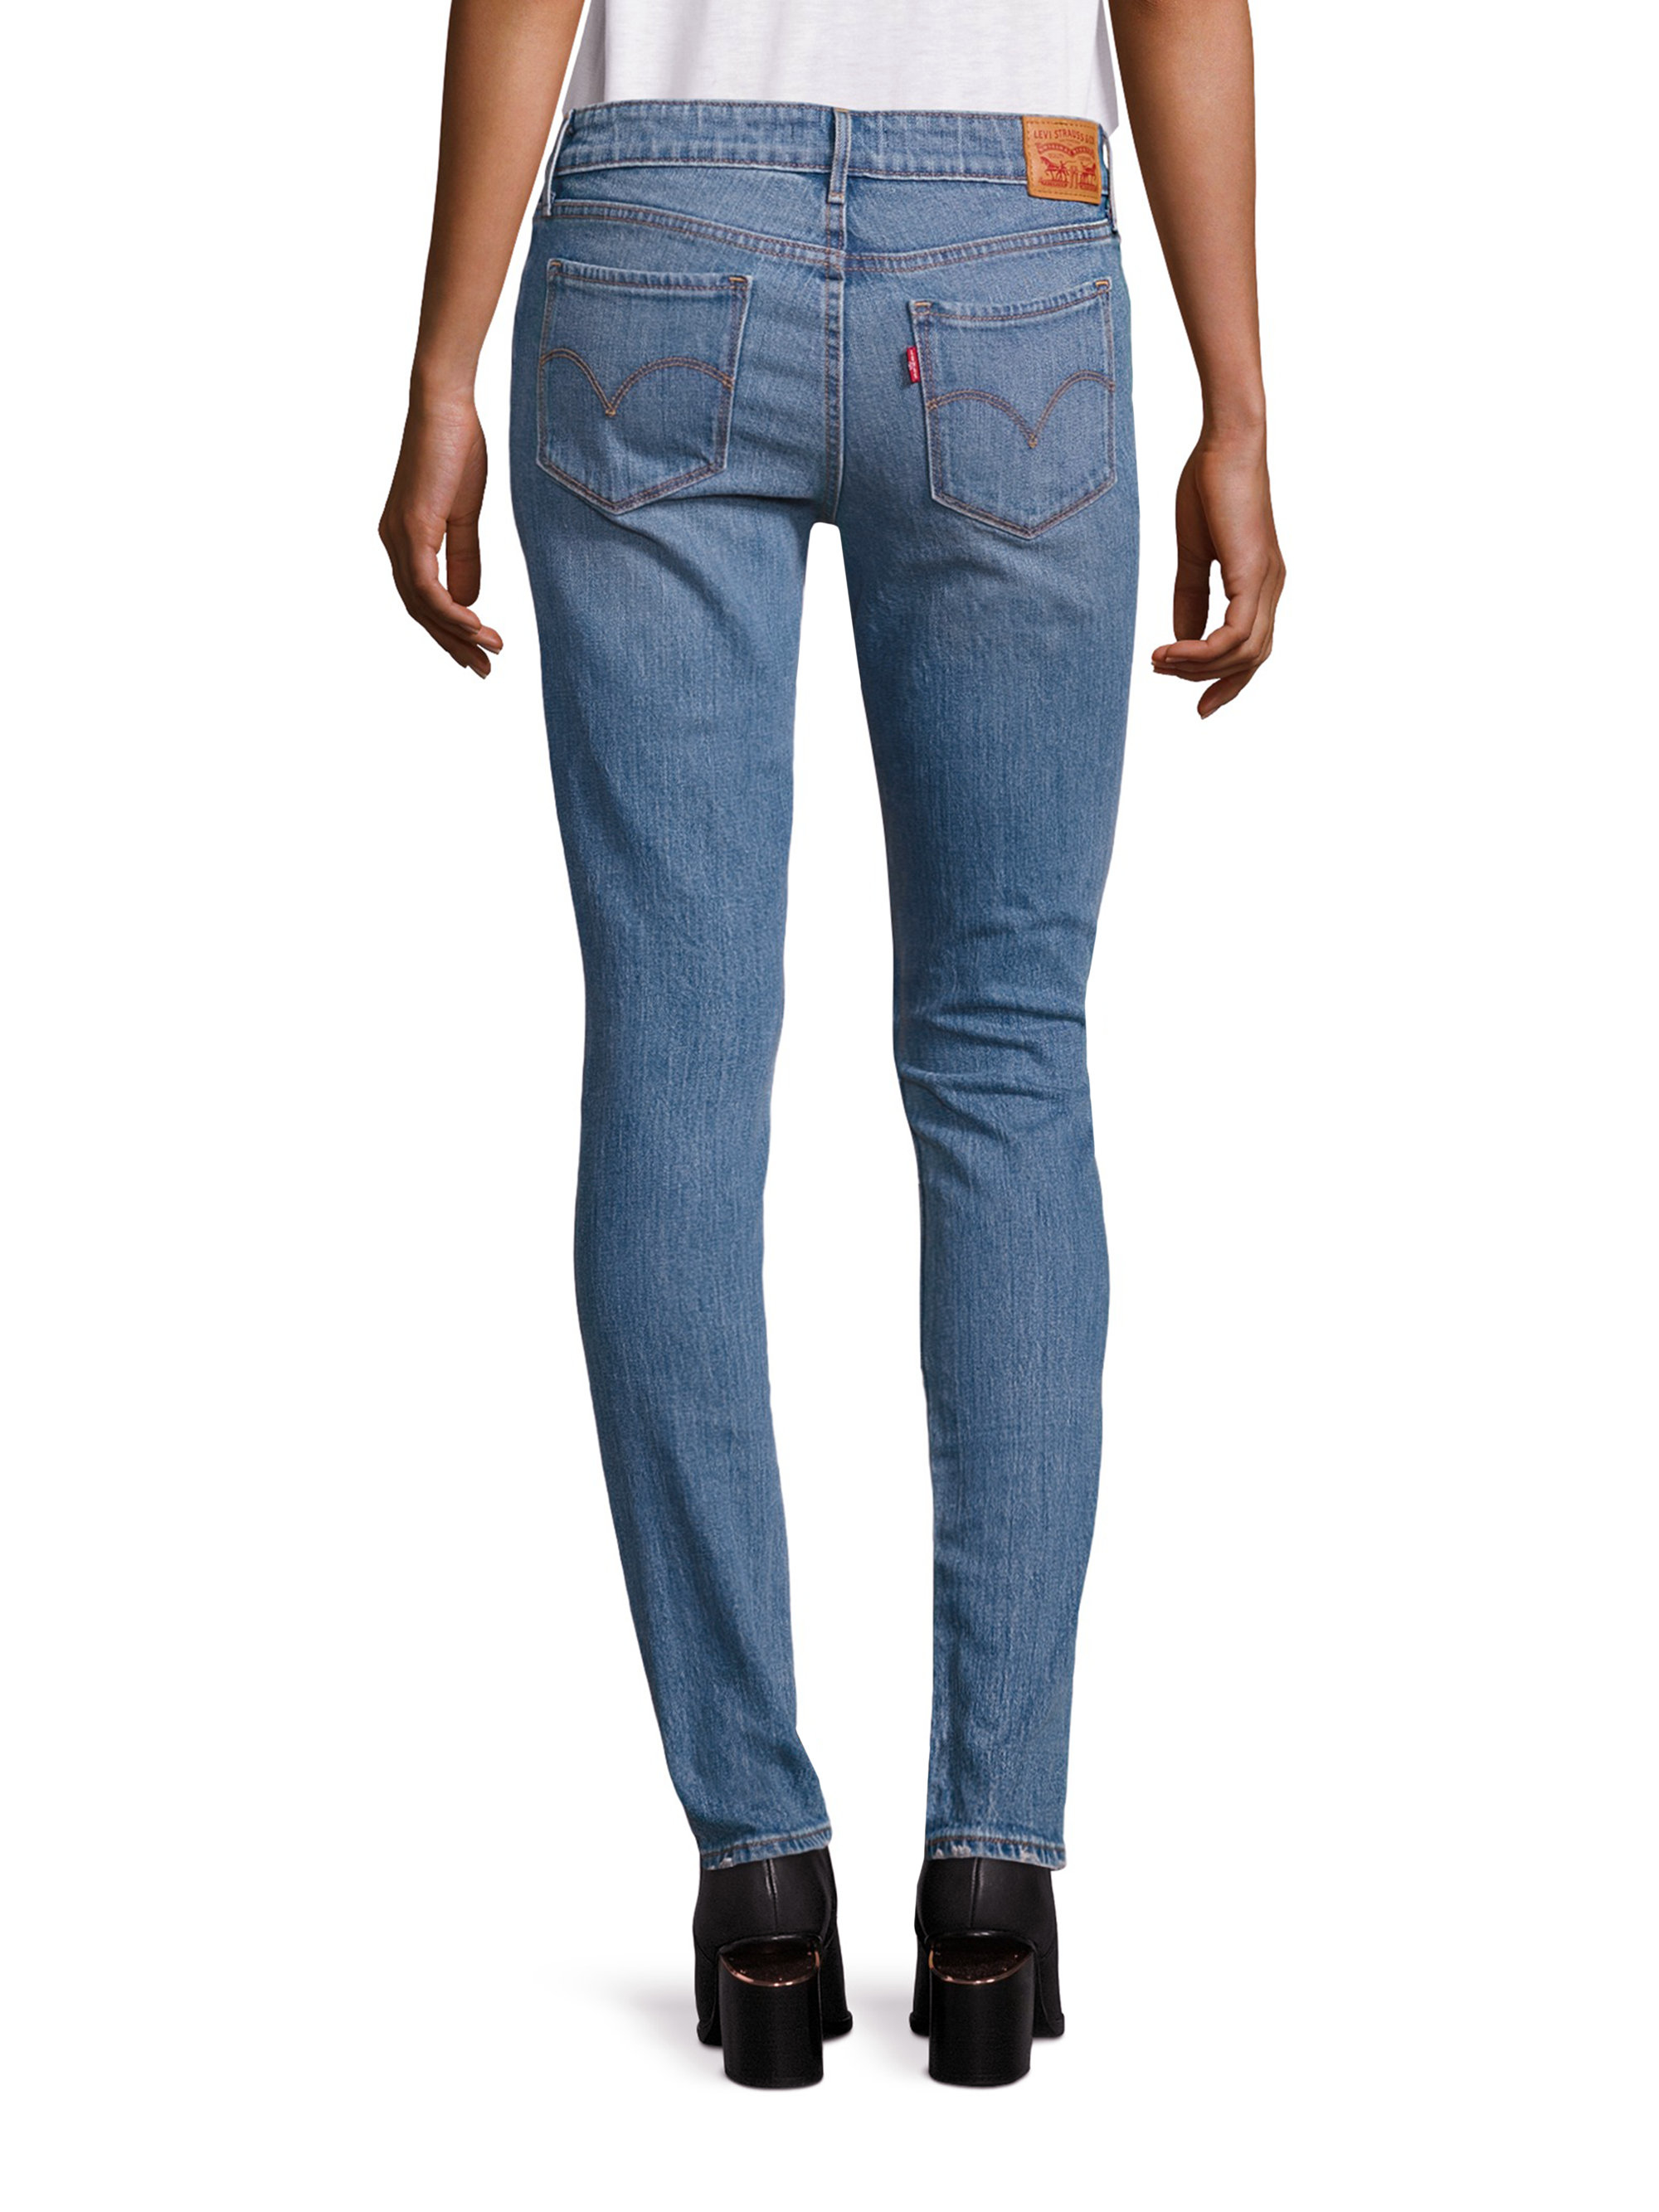 Lyst - Levi'S 711 Distressed Mid-rise Skinny Jeans in Blue